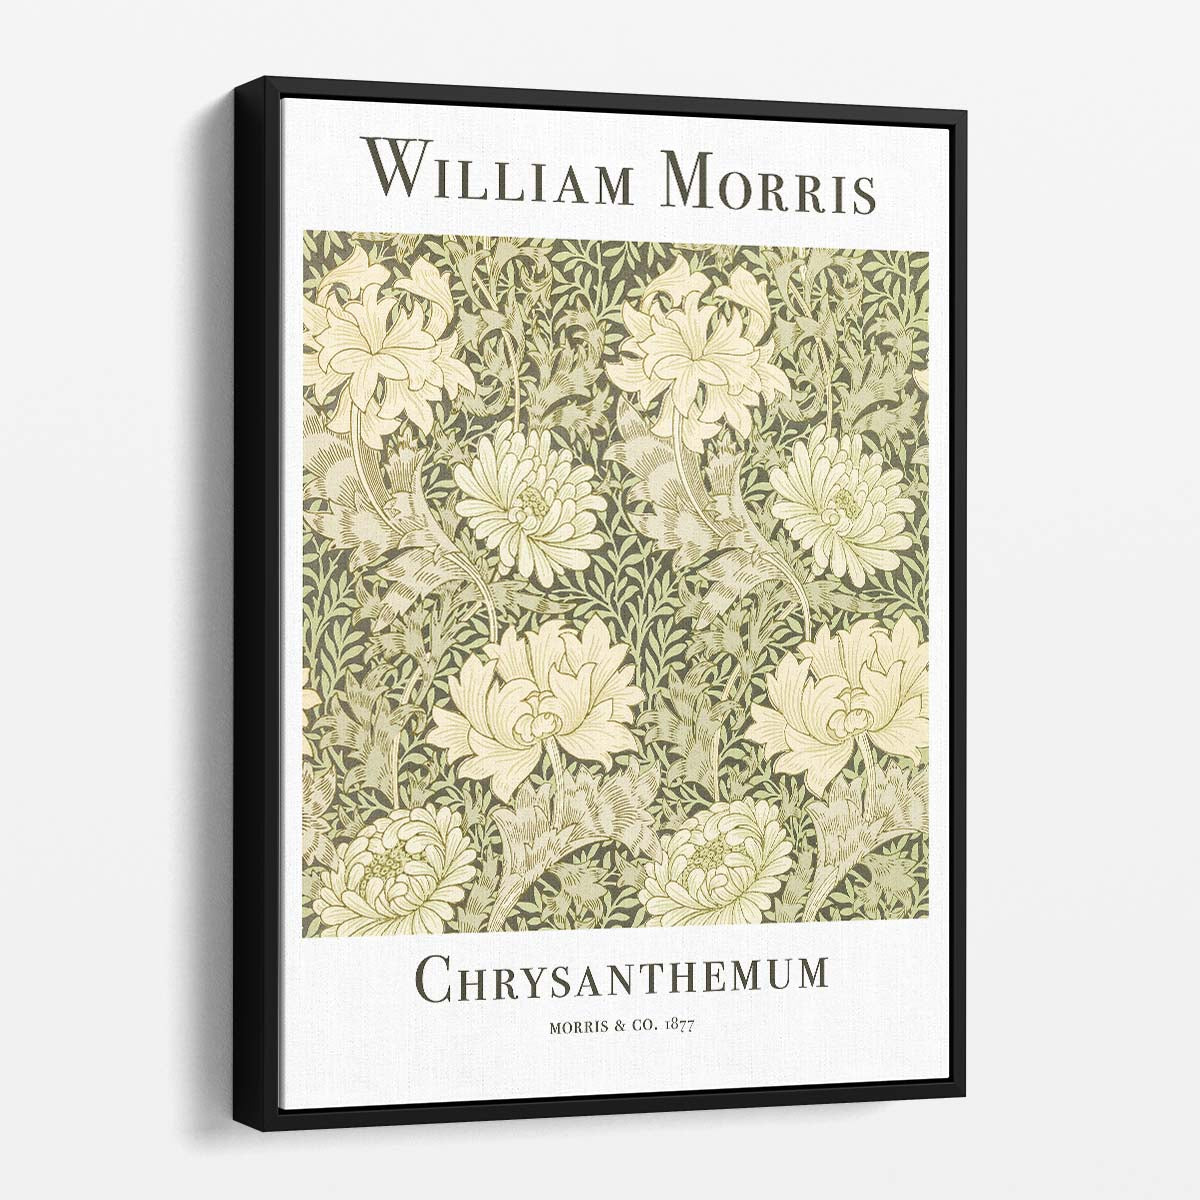 Vintage William Morris Chrysanthemum Botanical Illustration Wall Art Poster by Luxuriance Designs, made in USA